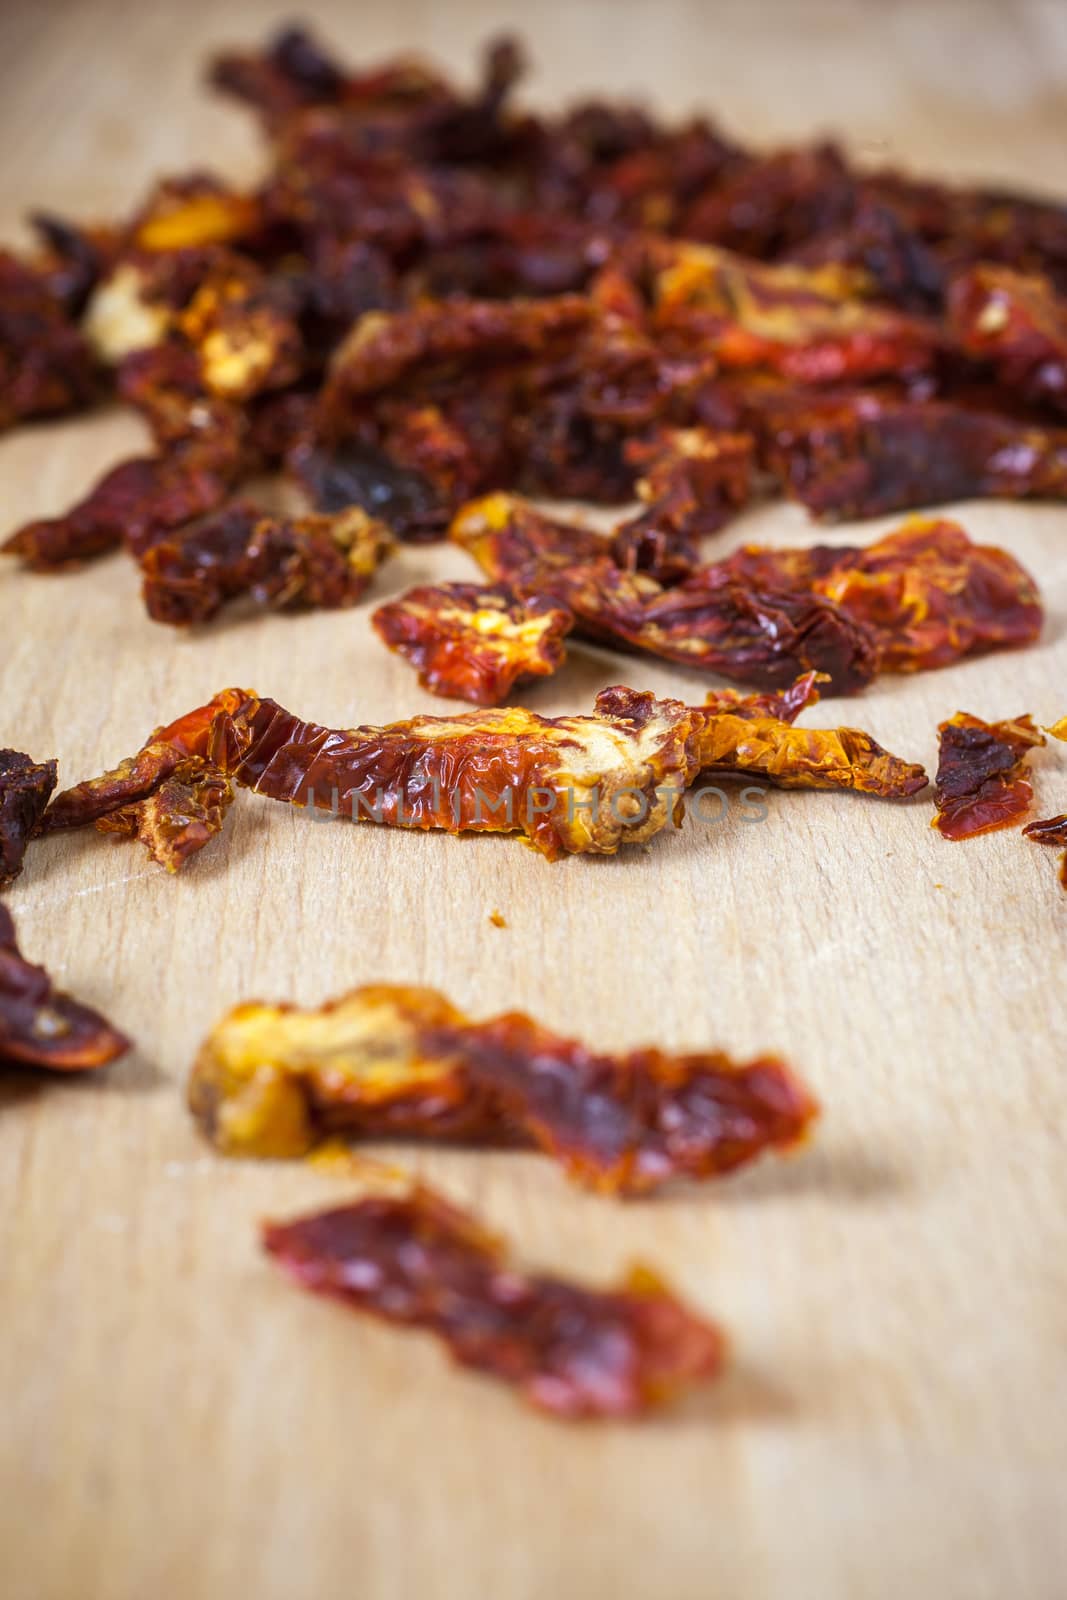 Sun Dried Tomatoes by SouthernLightStudios